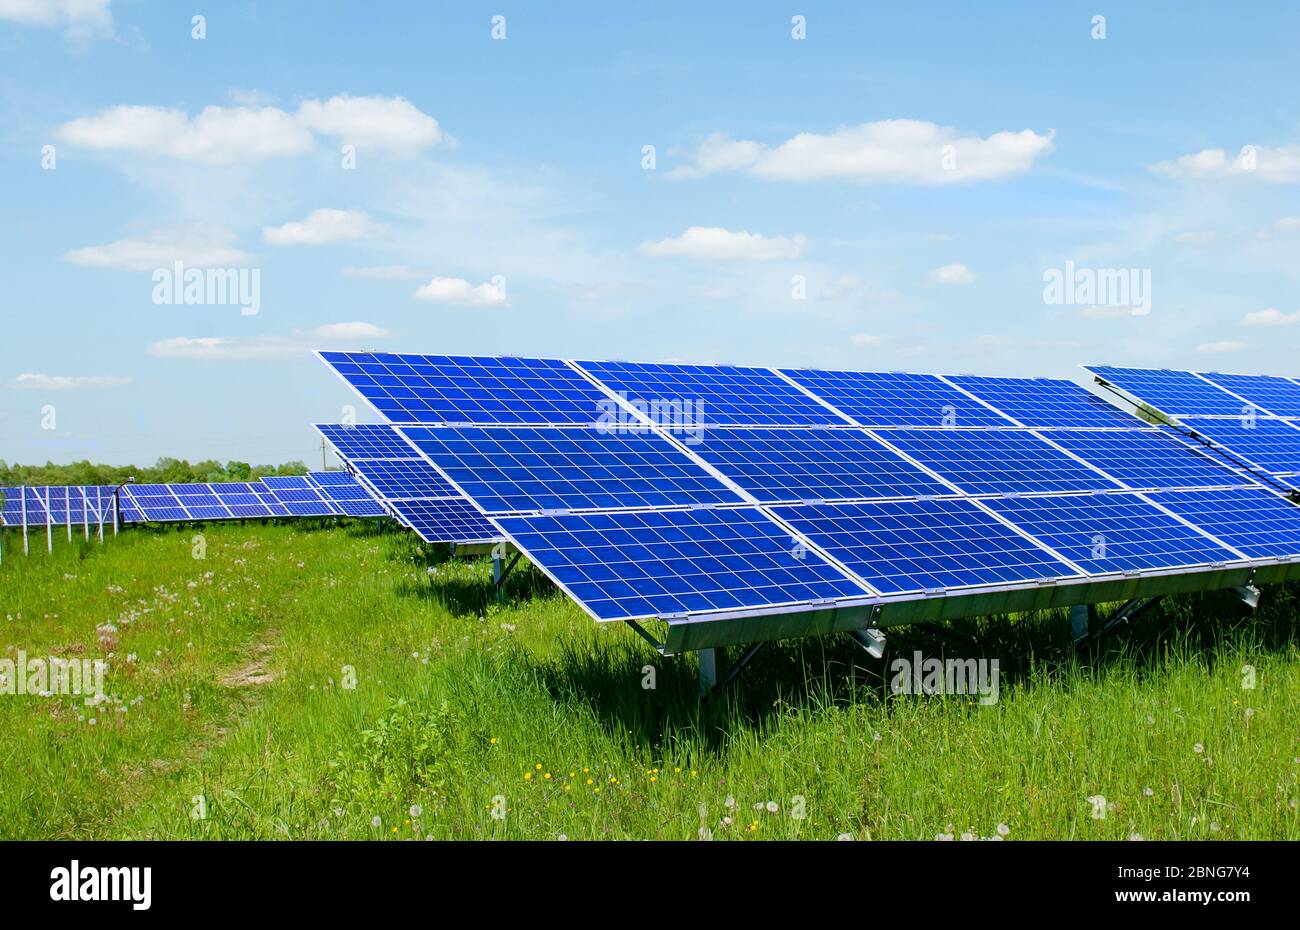 Solar panels and blue sky. Solar panels system power generators from sun. Clean technology for better future Stock Photo